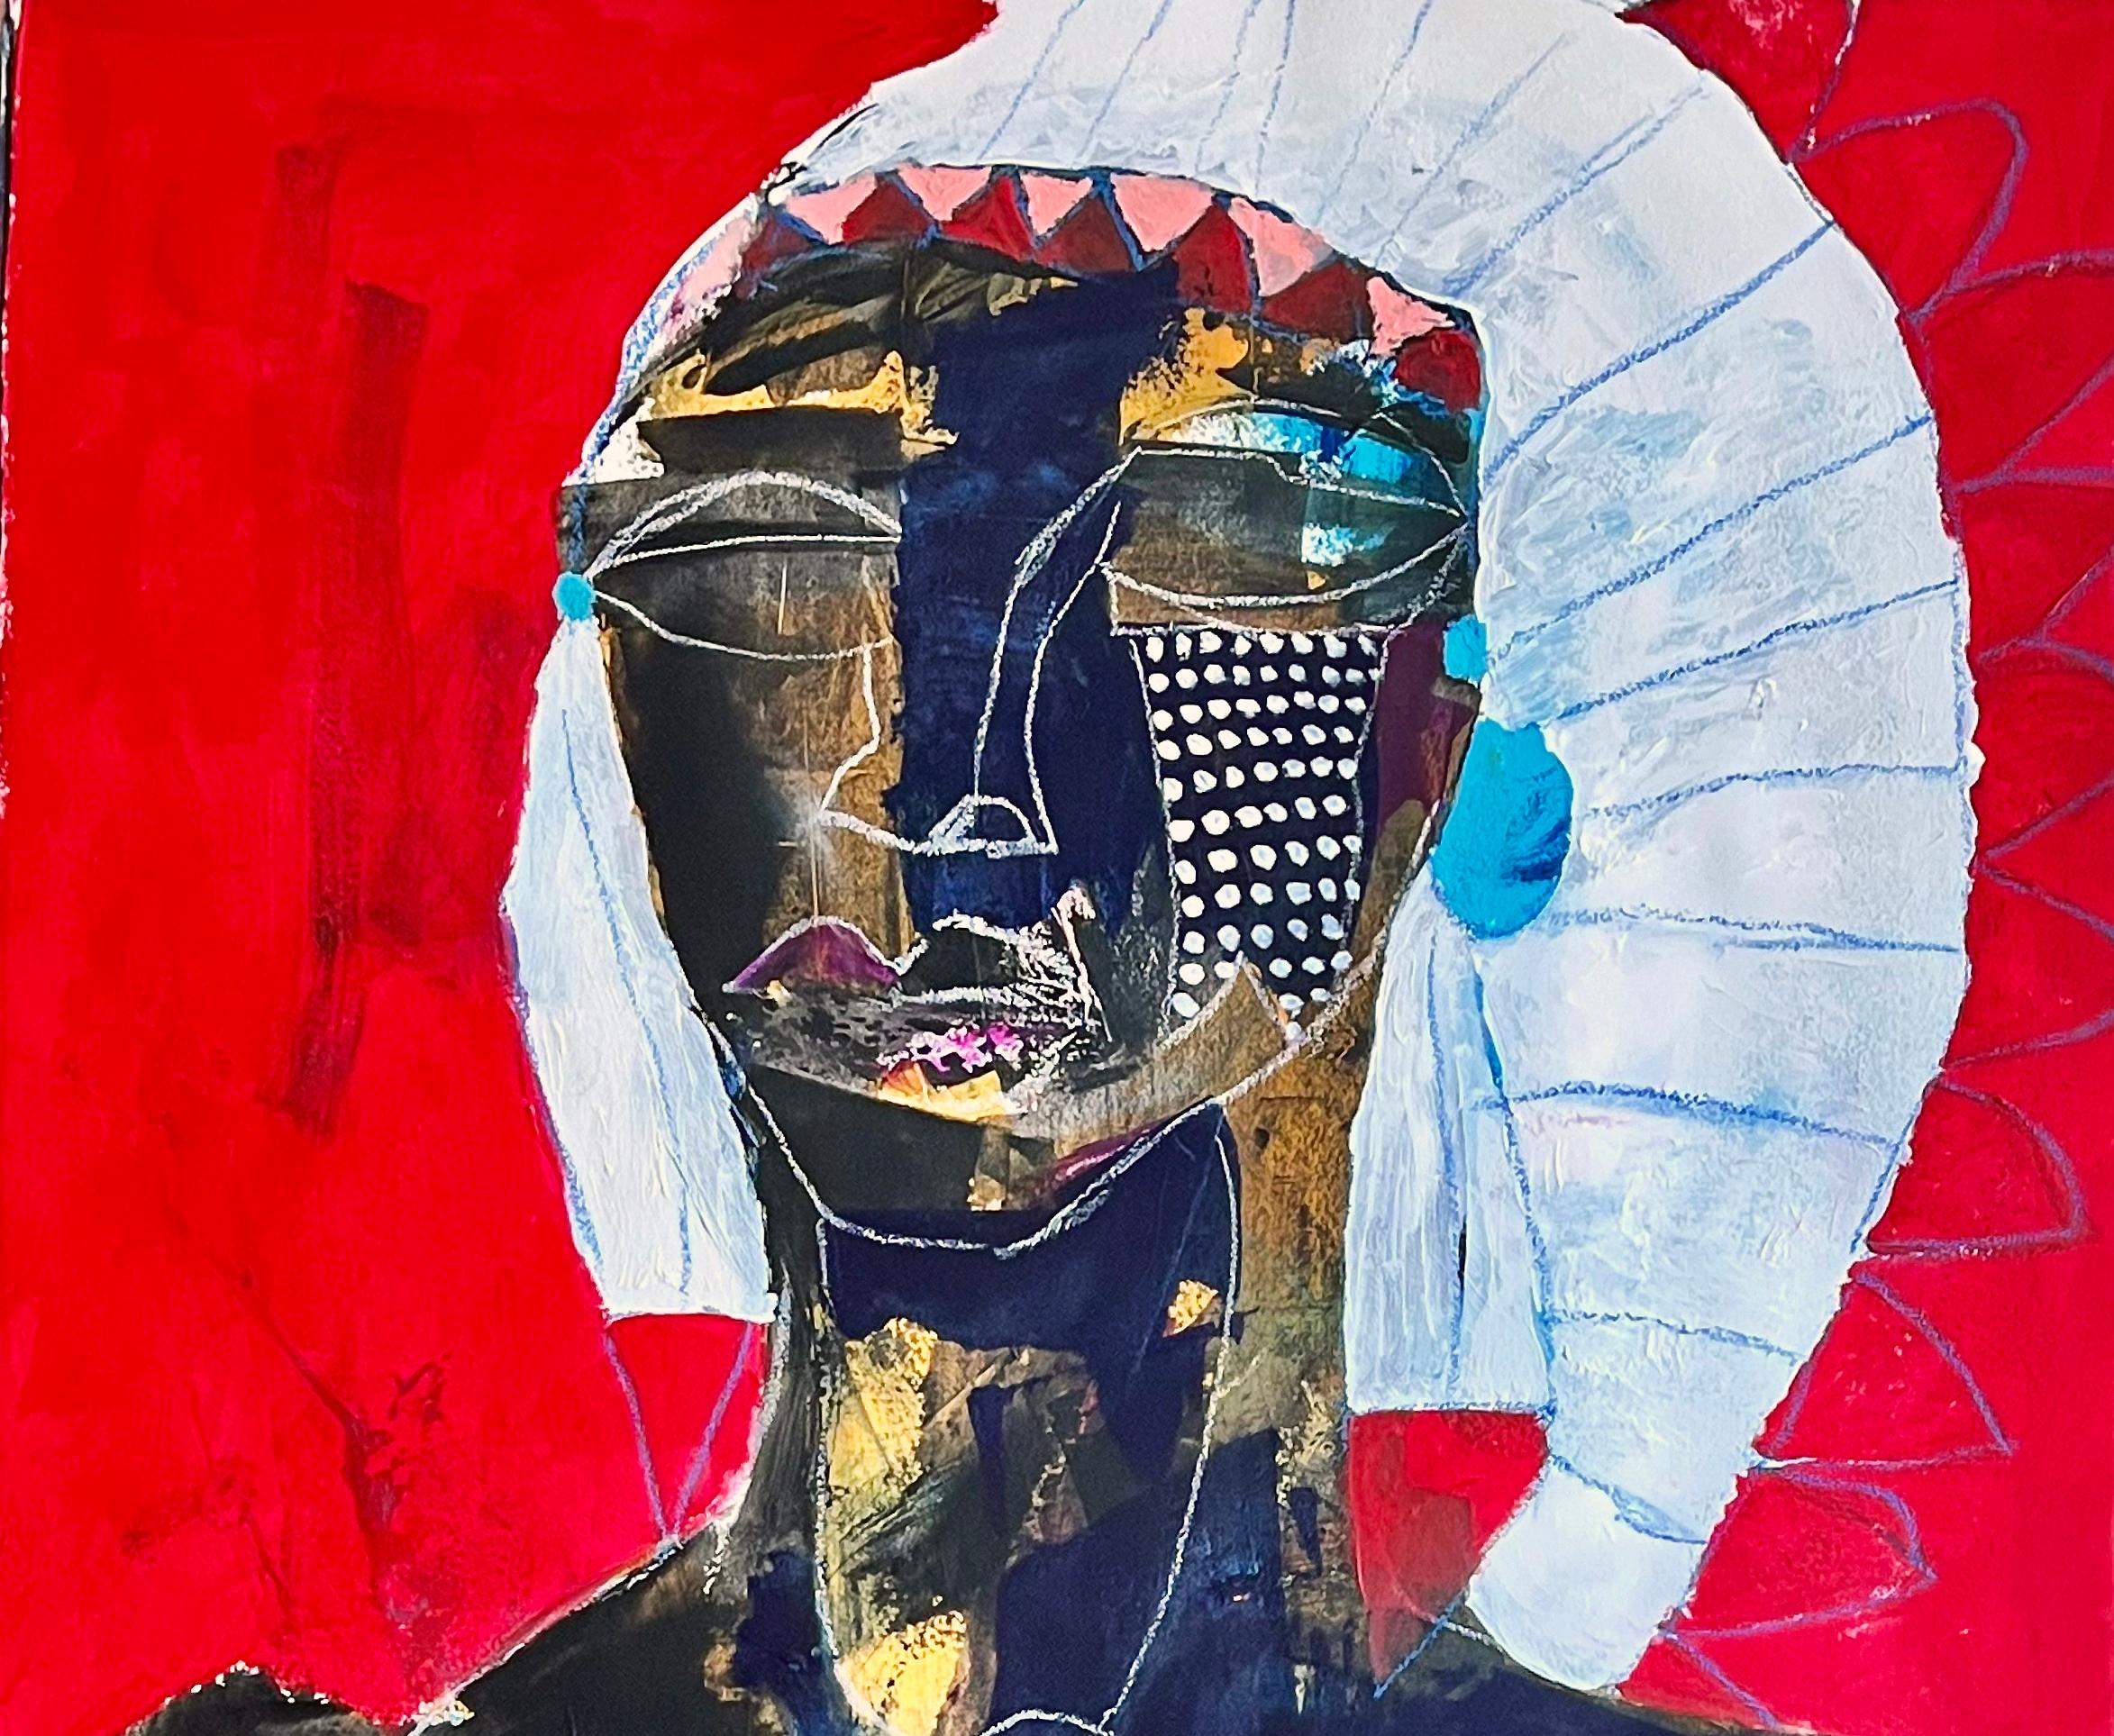 The Black Indian Chief by African American Artist Bai, Contemporary Art on Paper - Painting by Bai (Carl Karni-Bain)